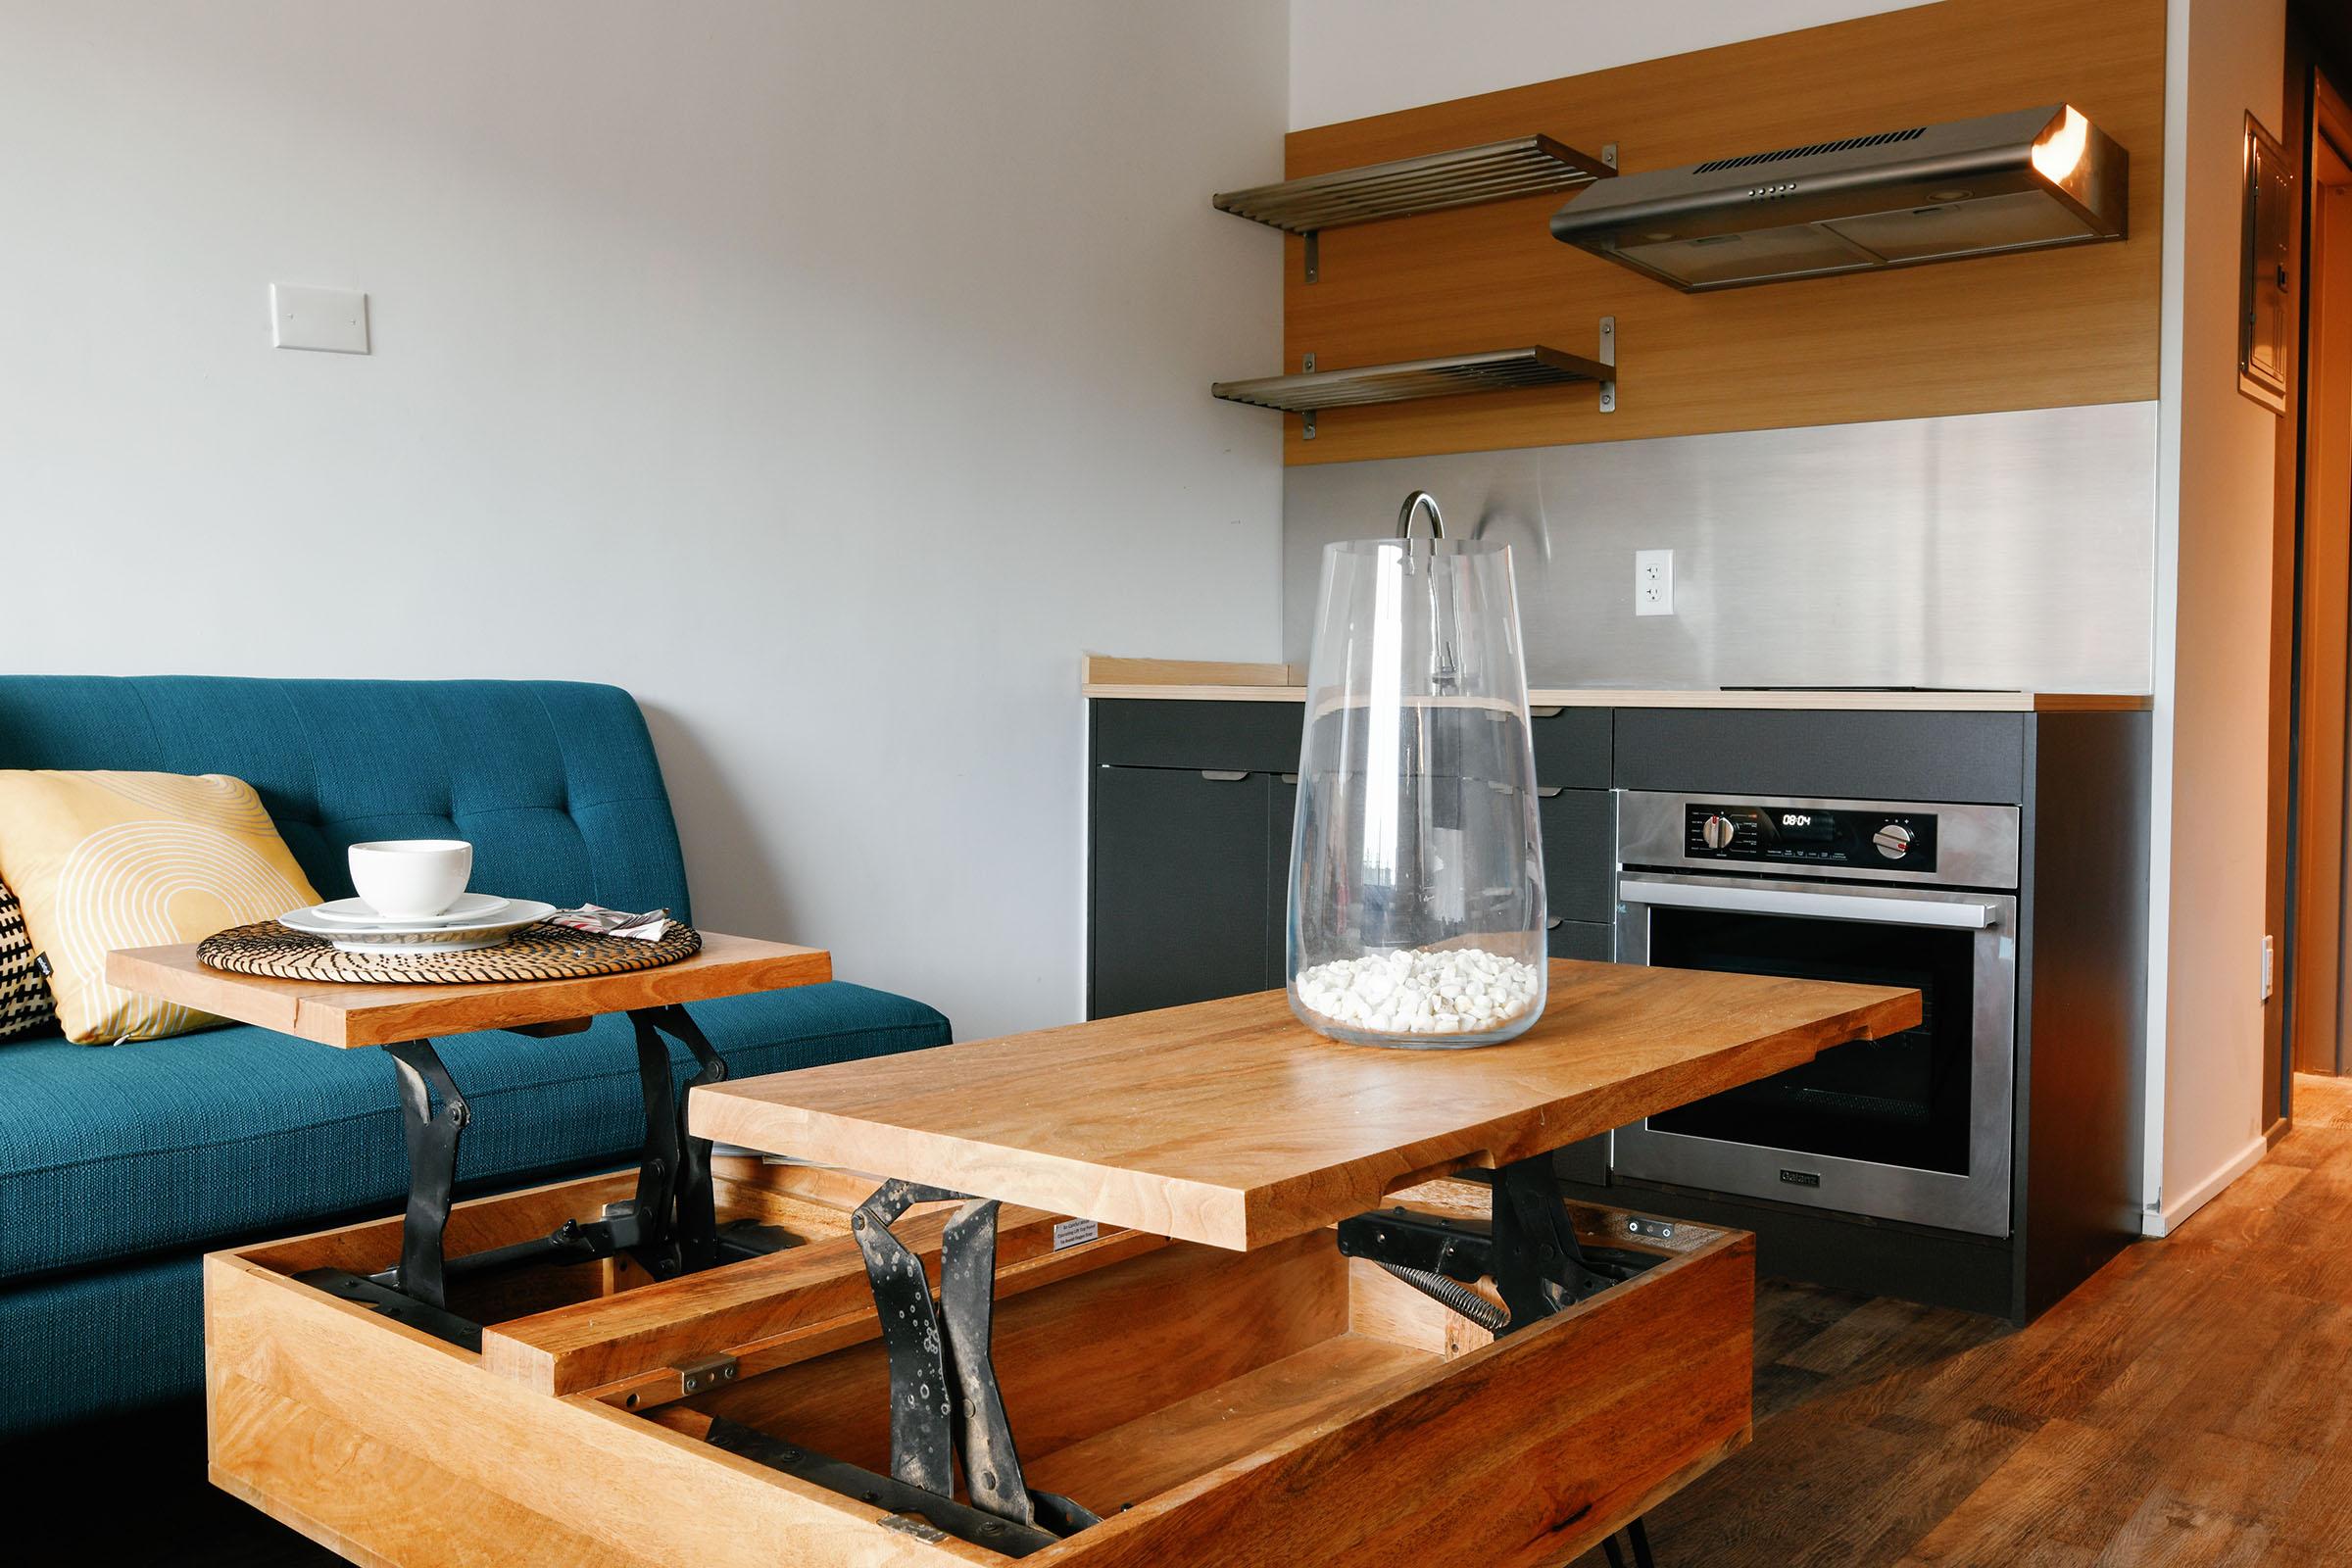 a kitchen with a stove top oven sitting inside of a wooden table